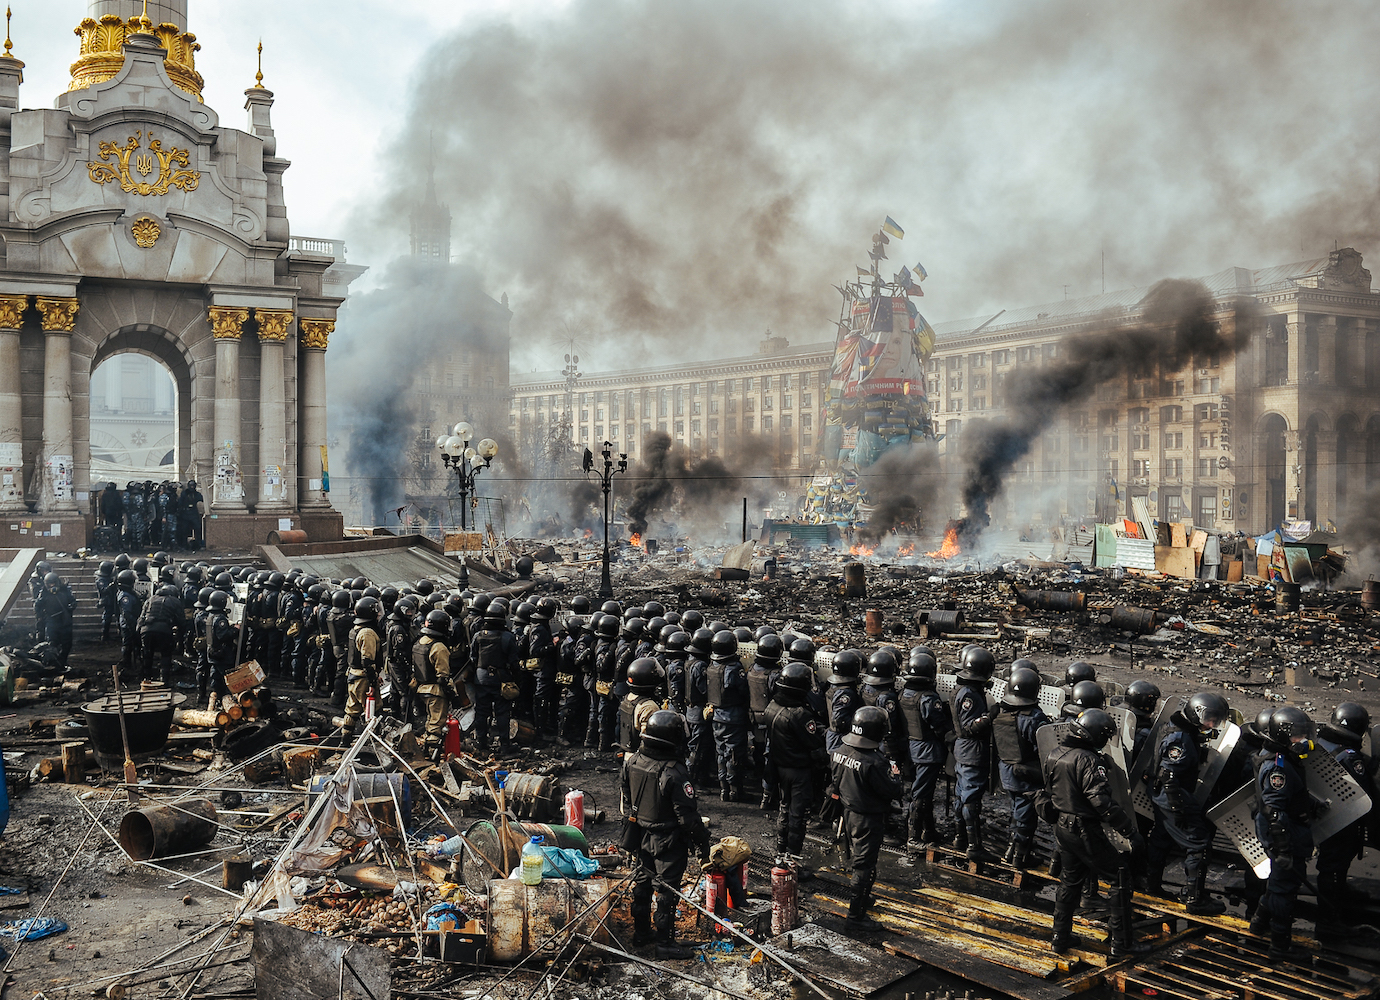 Could virtual reality hold the key to fighting disinformation in the aftermath of Euromaidan?